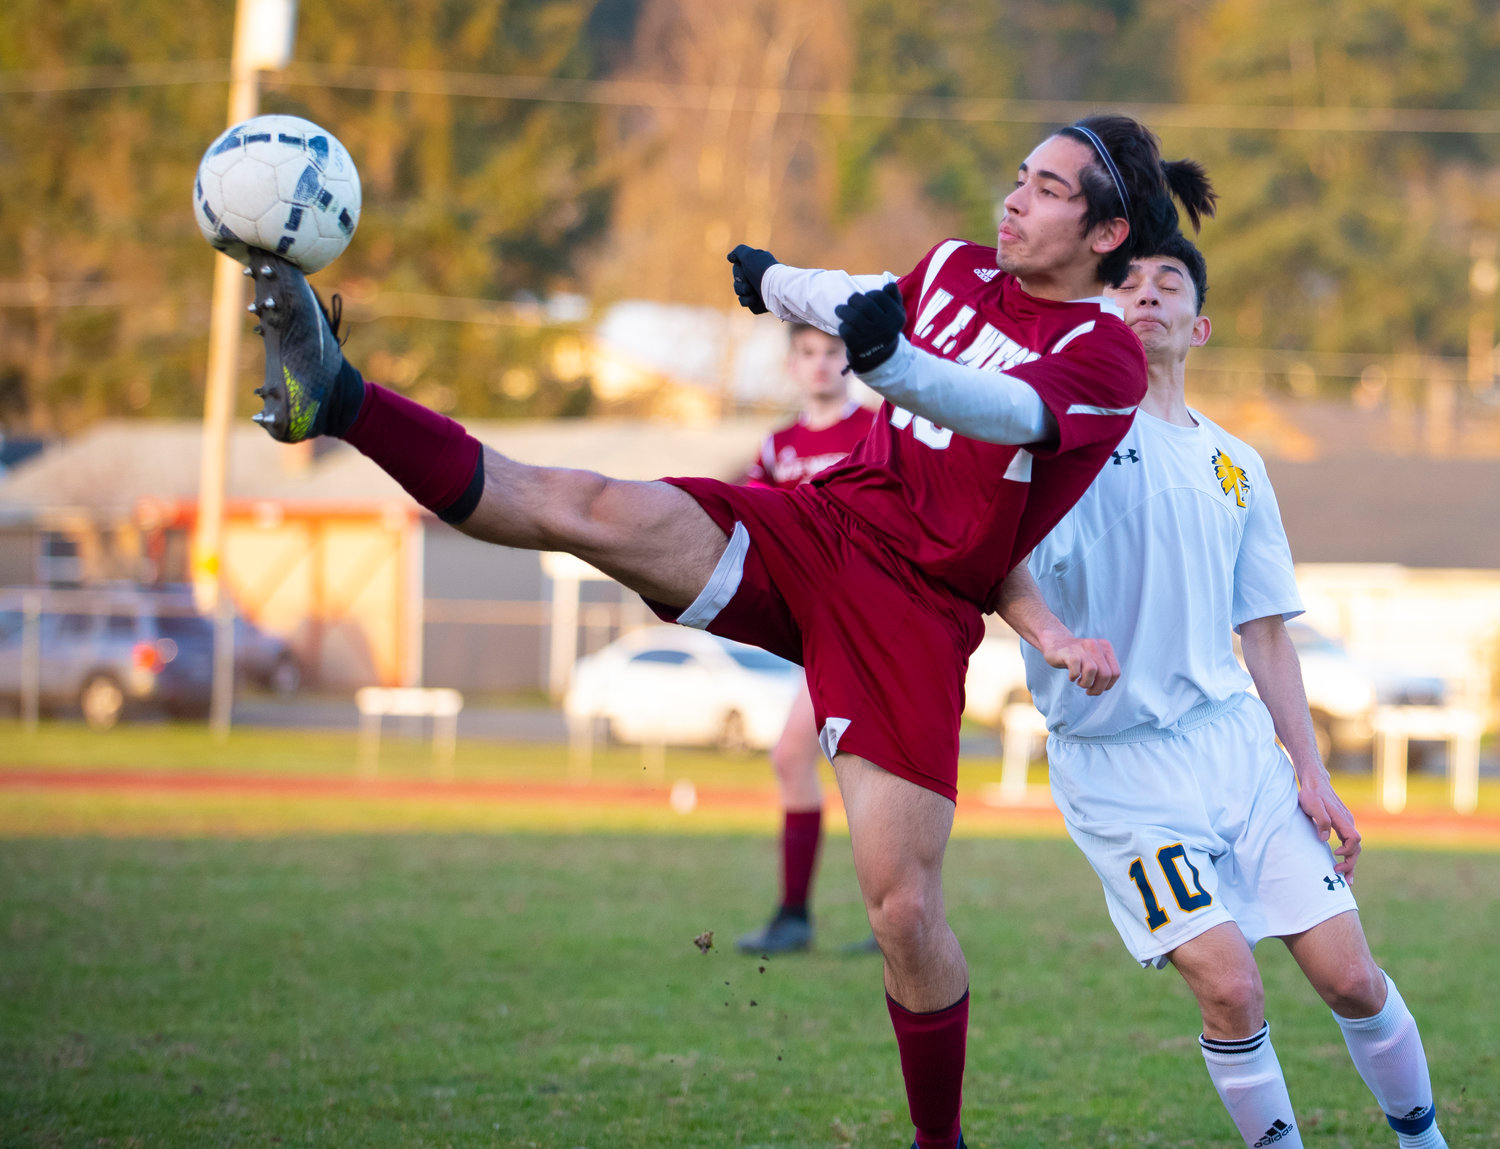 W.F. West junior defender Isaac Madrigal smashes the ball during the season opener on Tuesday against Aberdeen.